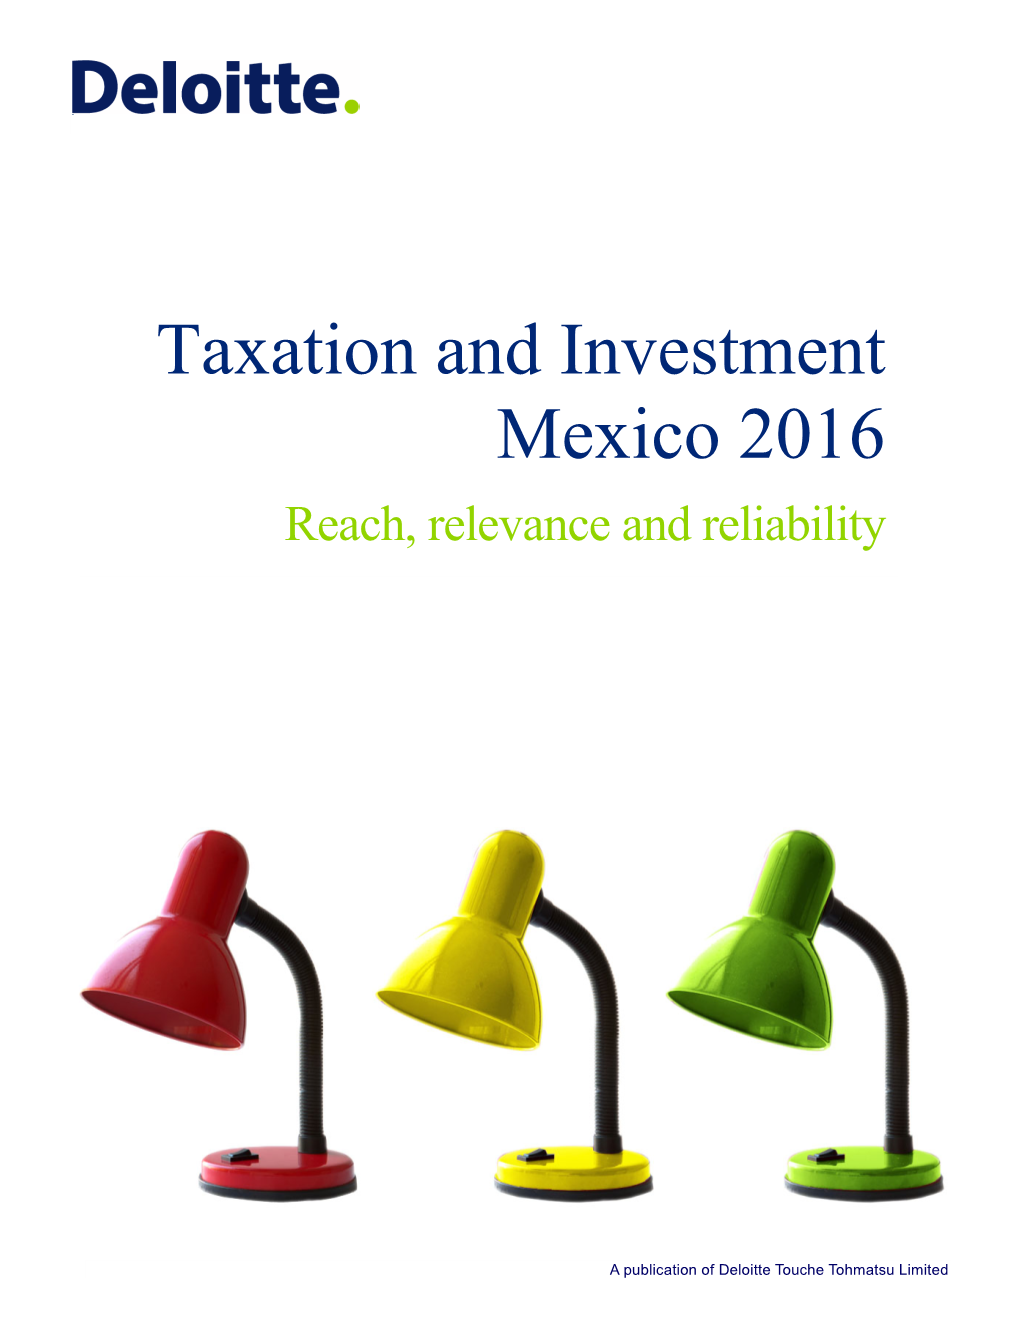 Taxation and Investment in Mexico 2016